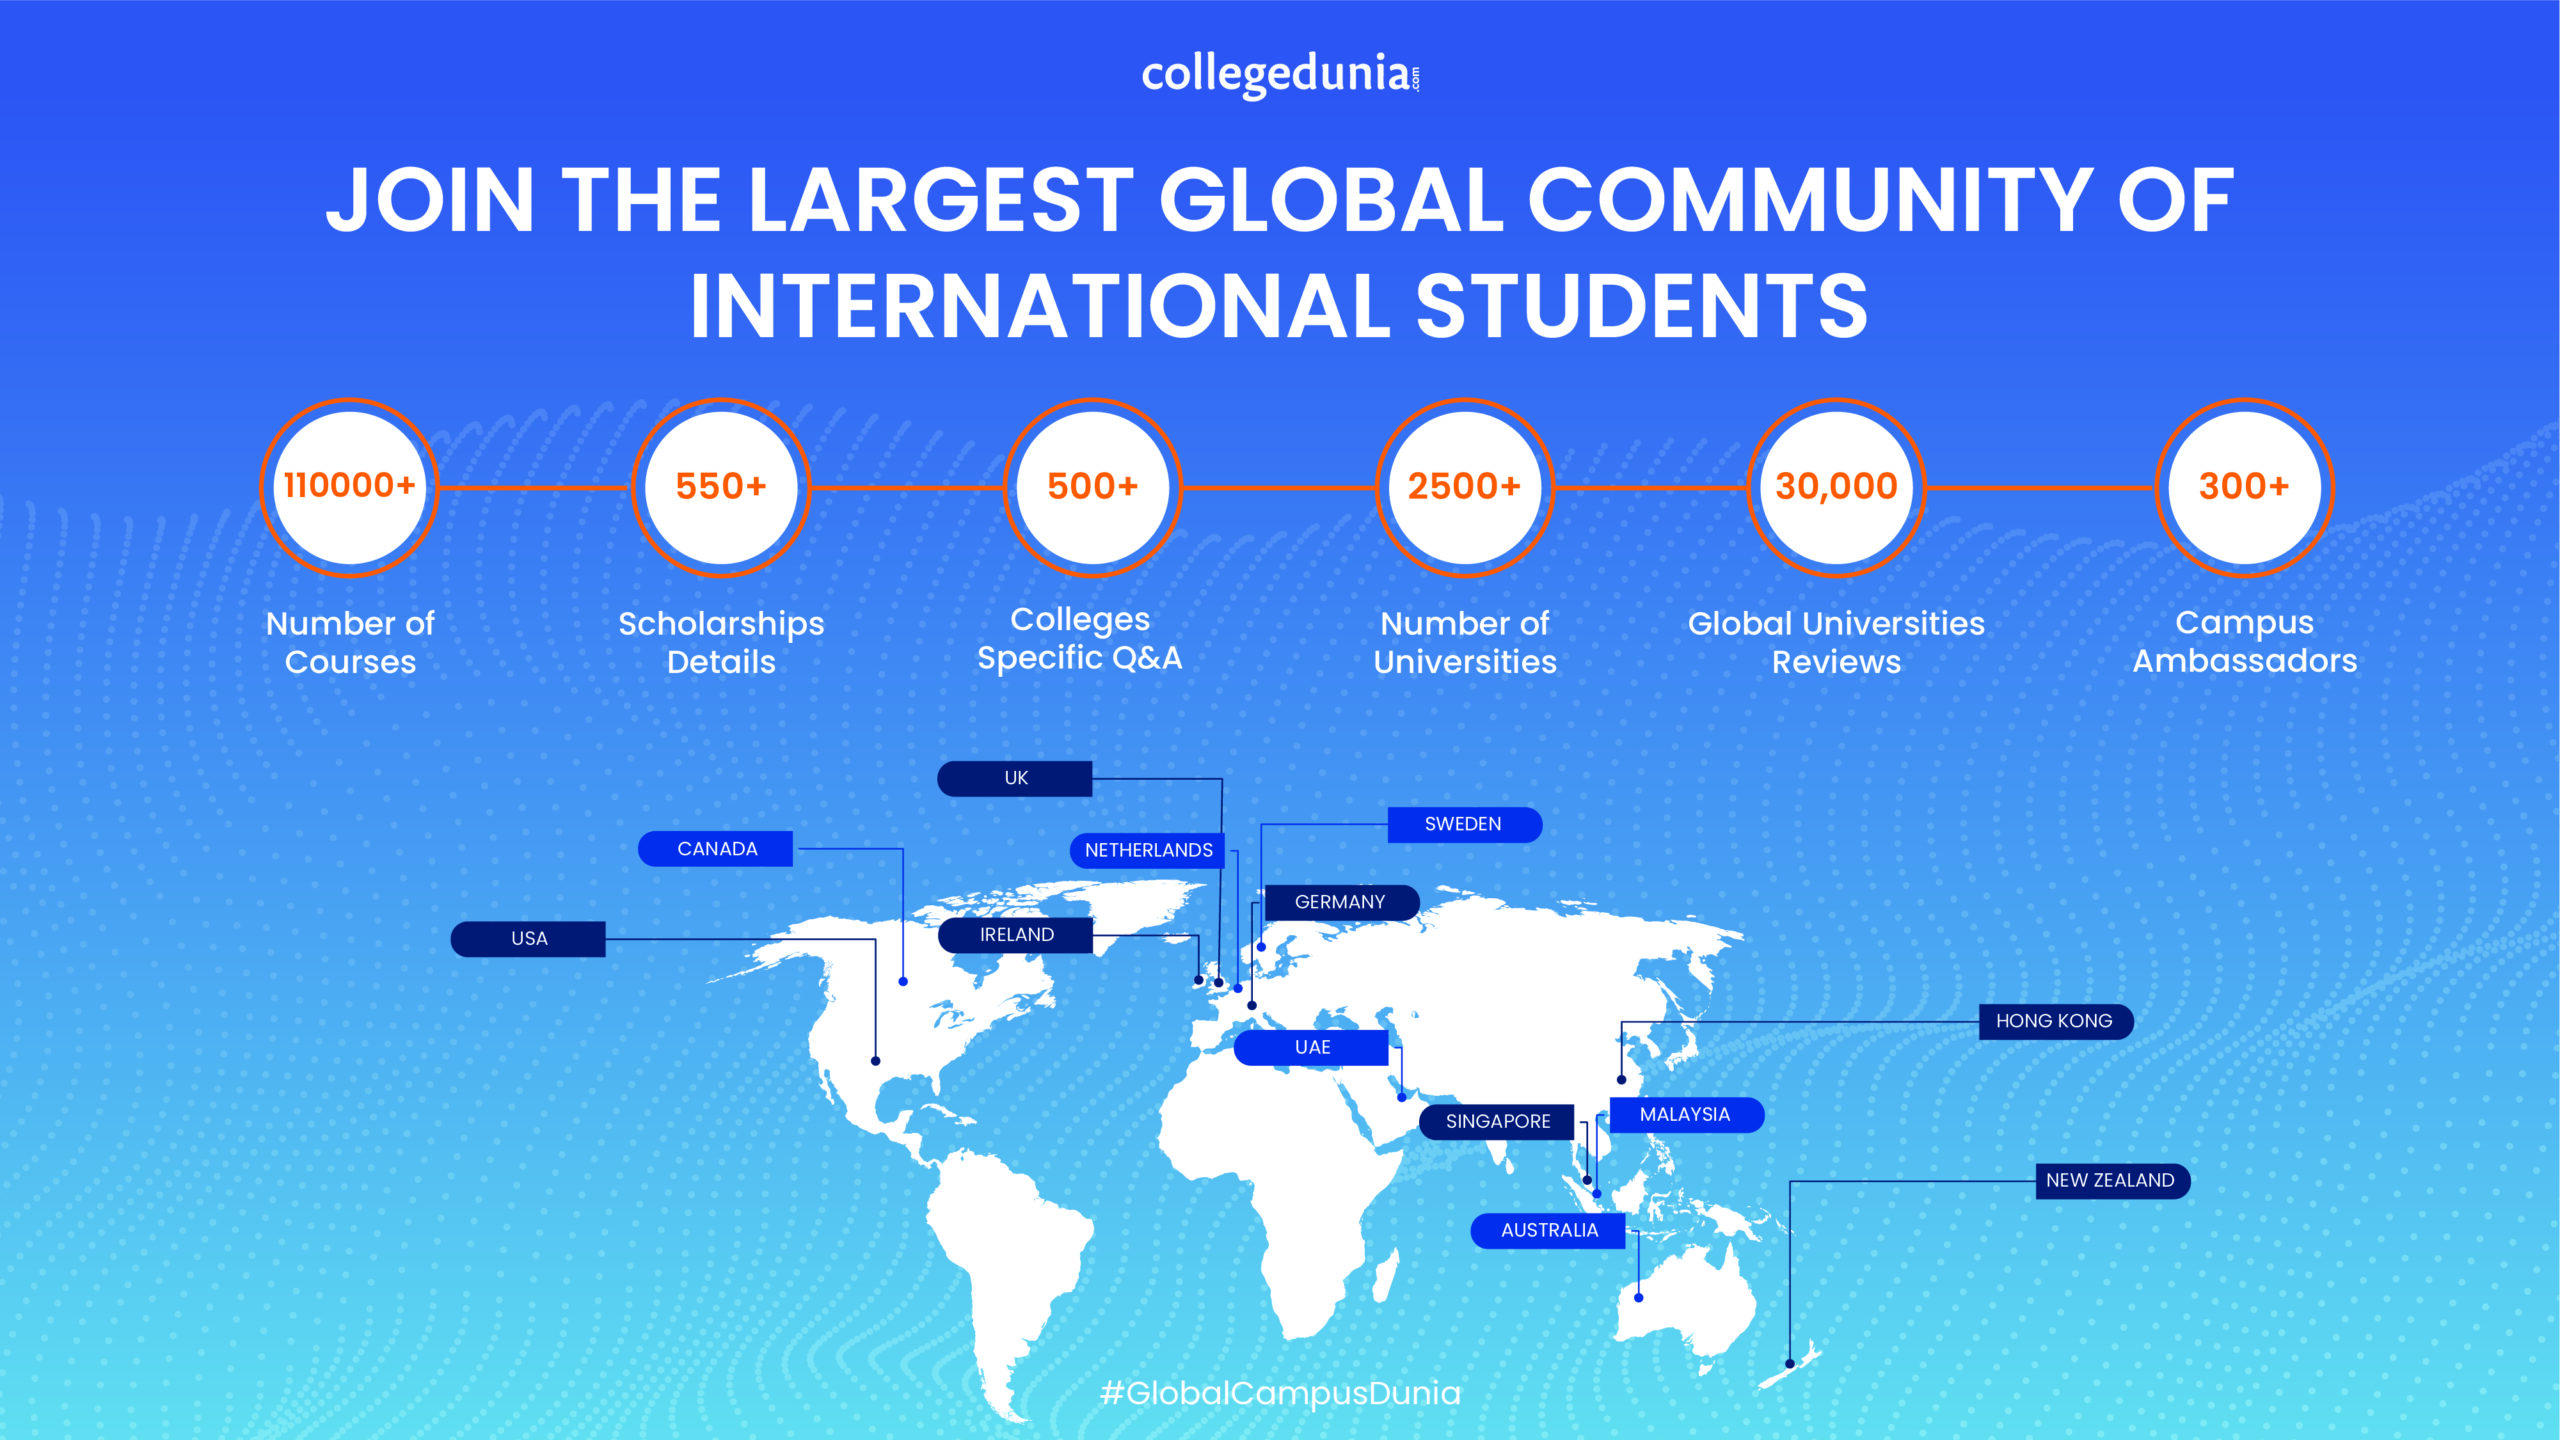 Collegedunia Study Abroad sees high conversion rates with over 2M monthly users